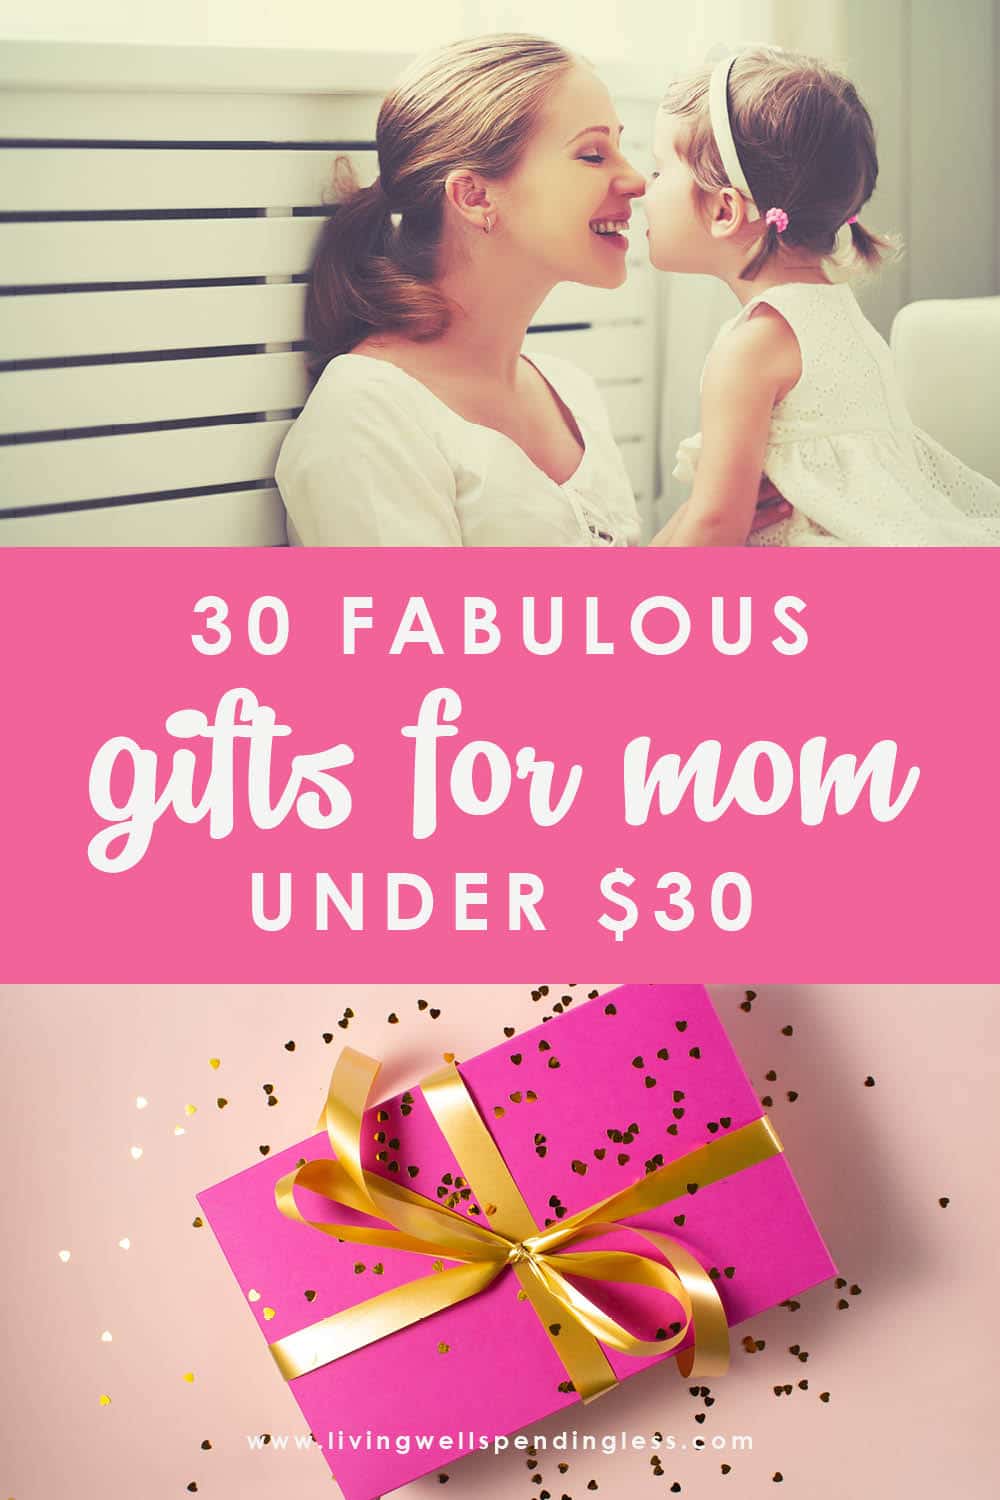 20 Cheap Mother's Day Gifts for $25 or Less That Mom Will Love